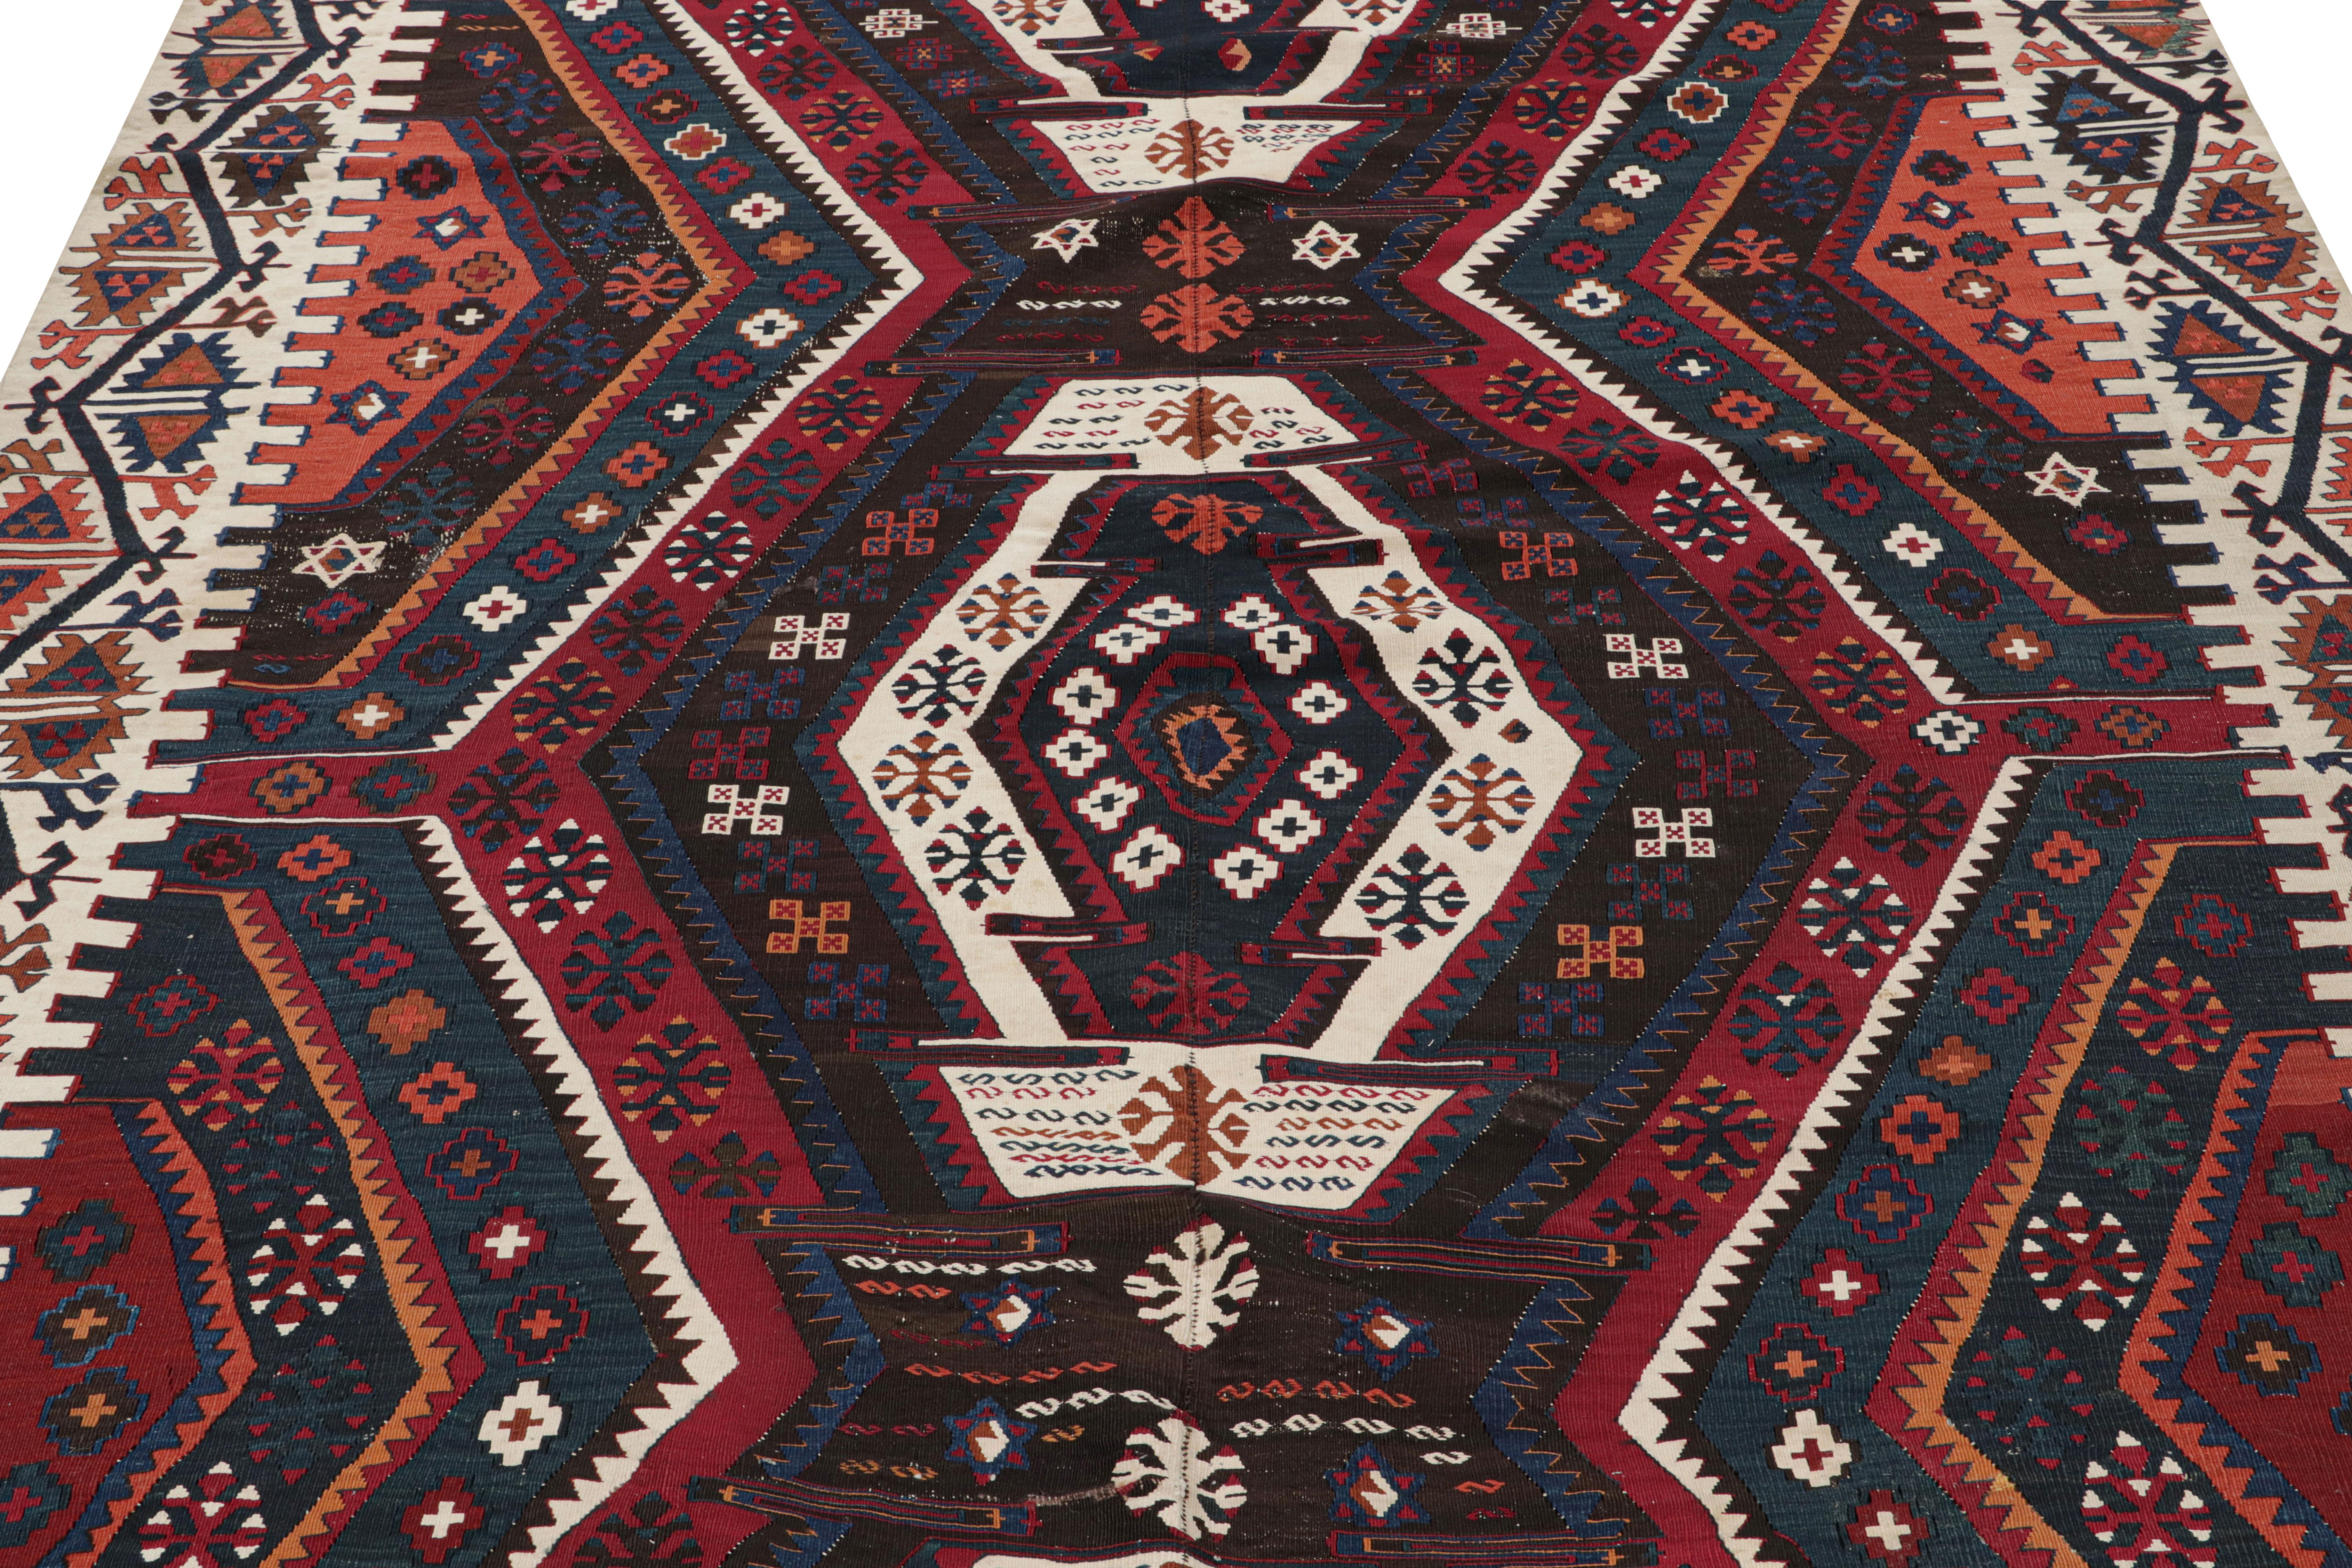 Wool Vintage Turkish Kilim with Polychromatic Geometric Patterns, from Rug & Kilim For Sale